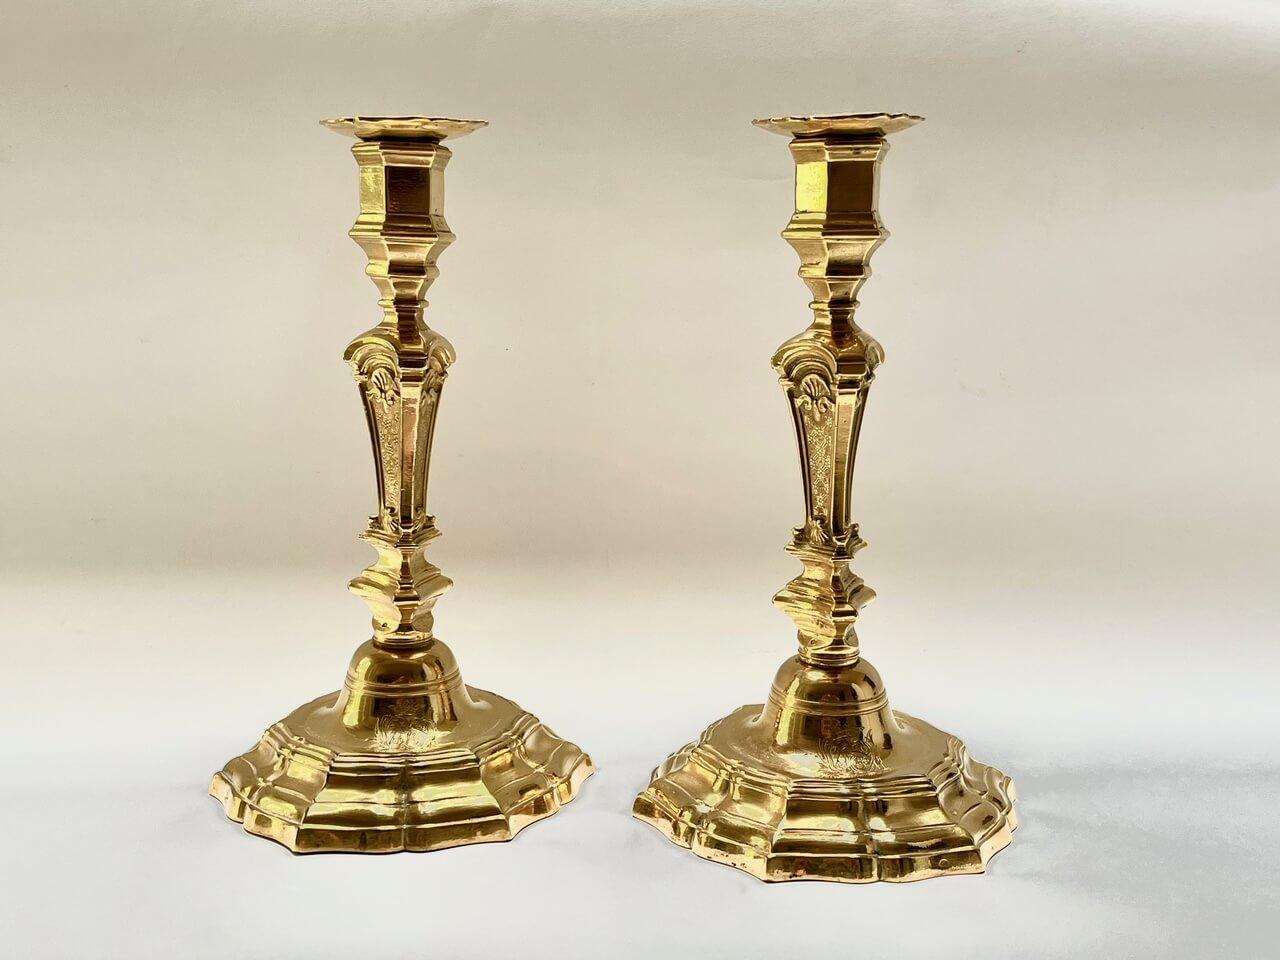 A beautiful and fine pair of French, circa 1840 Louis Philippe period, Louis XIV baroque revival style finely cast ormolu or fire-gilded solid bronze (bronze doré) candlesticks having original removable bobeches and engraved royal armorials or